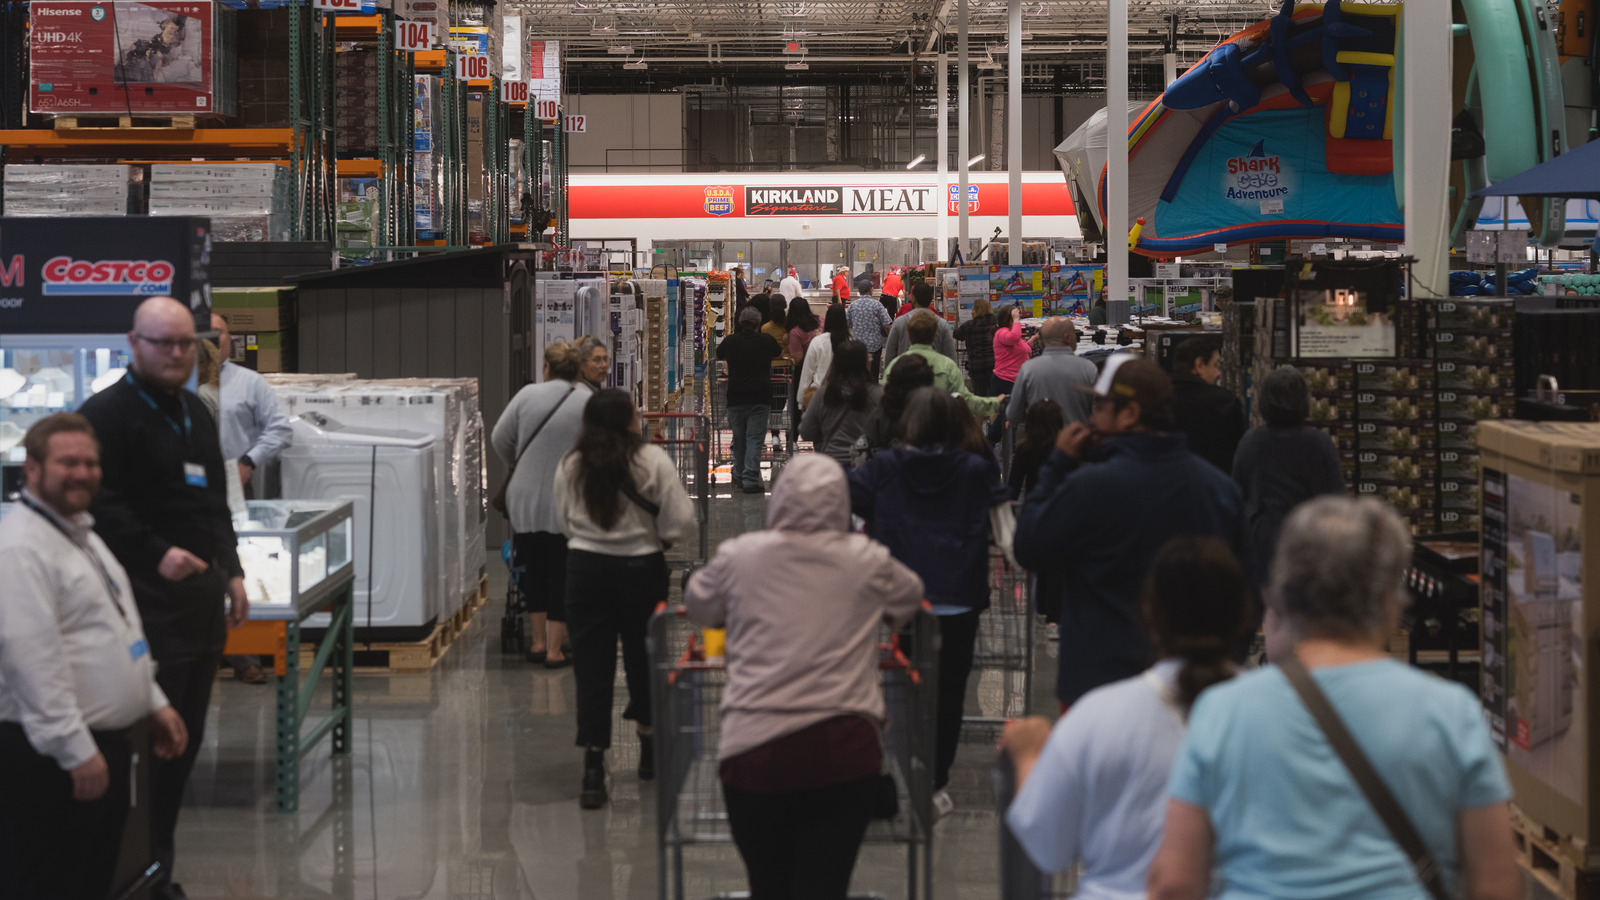 For A Less Crowded Costco Experience, Shop During A Big Game – The Daily Meal